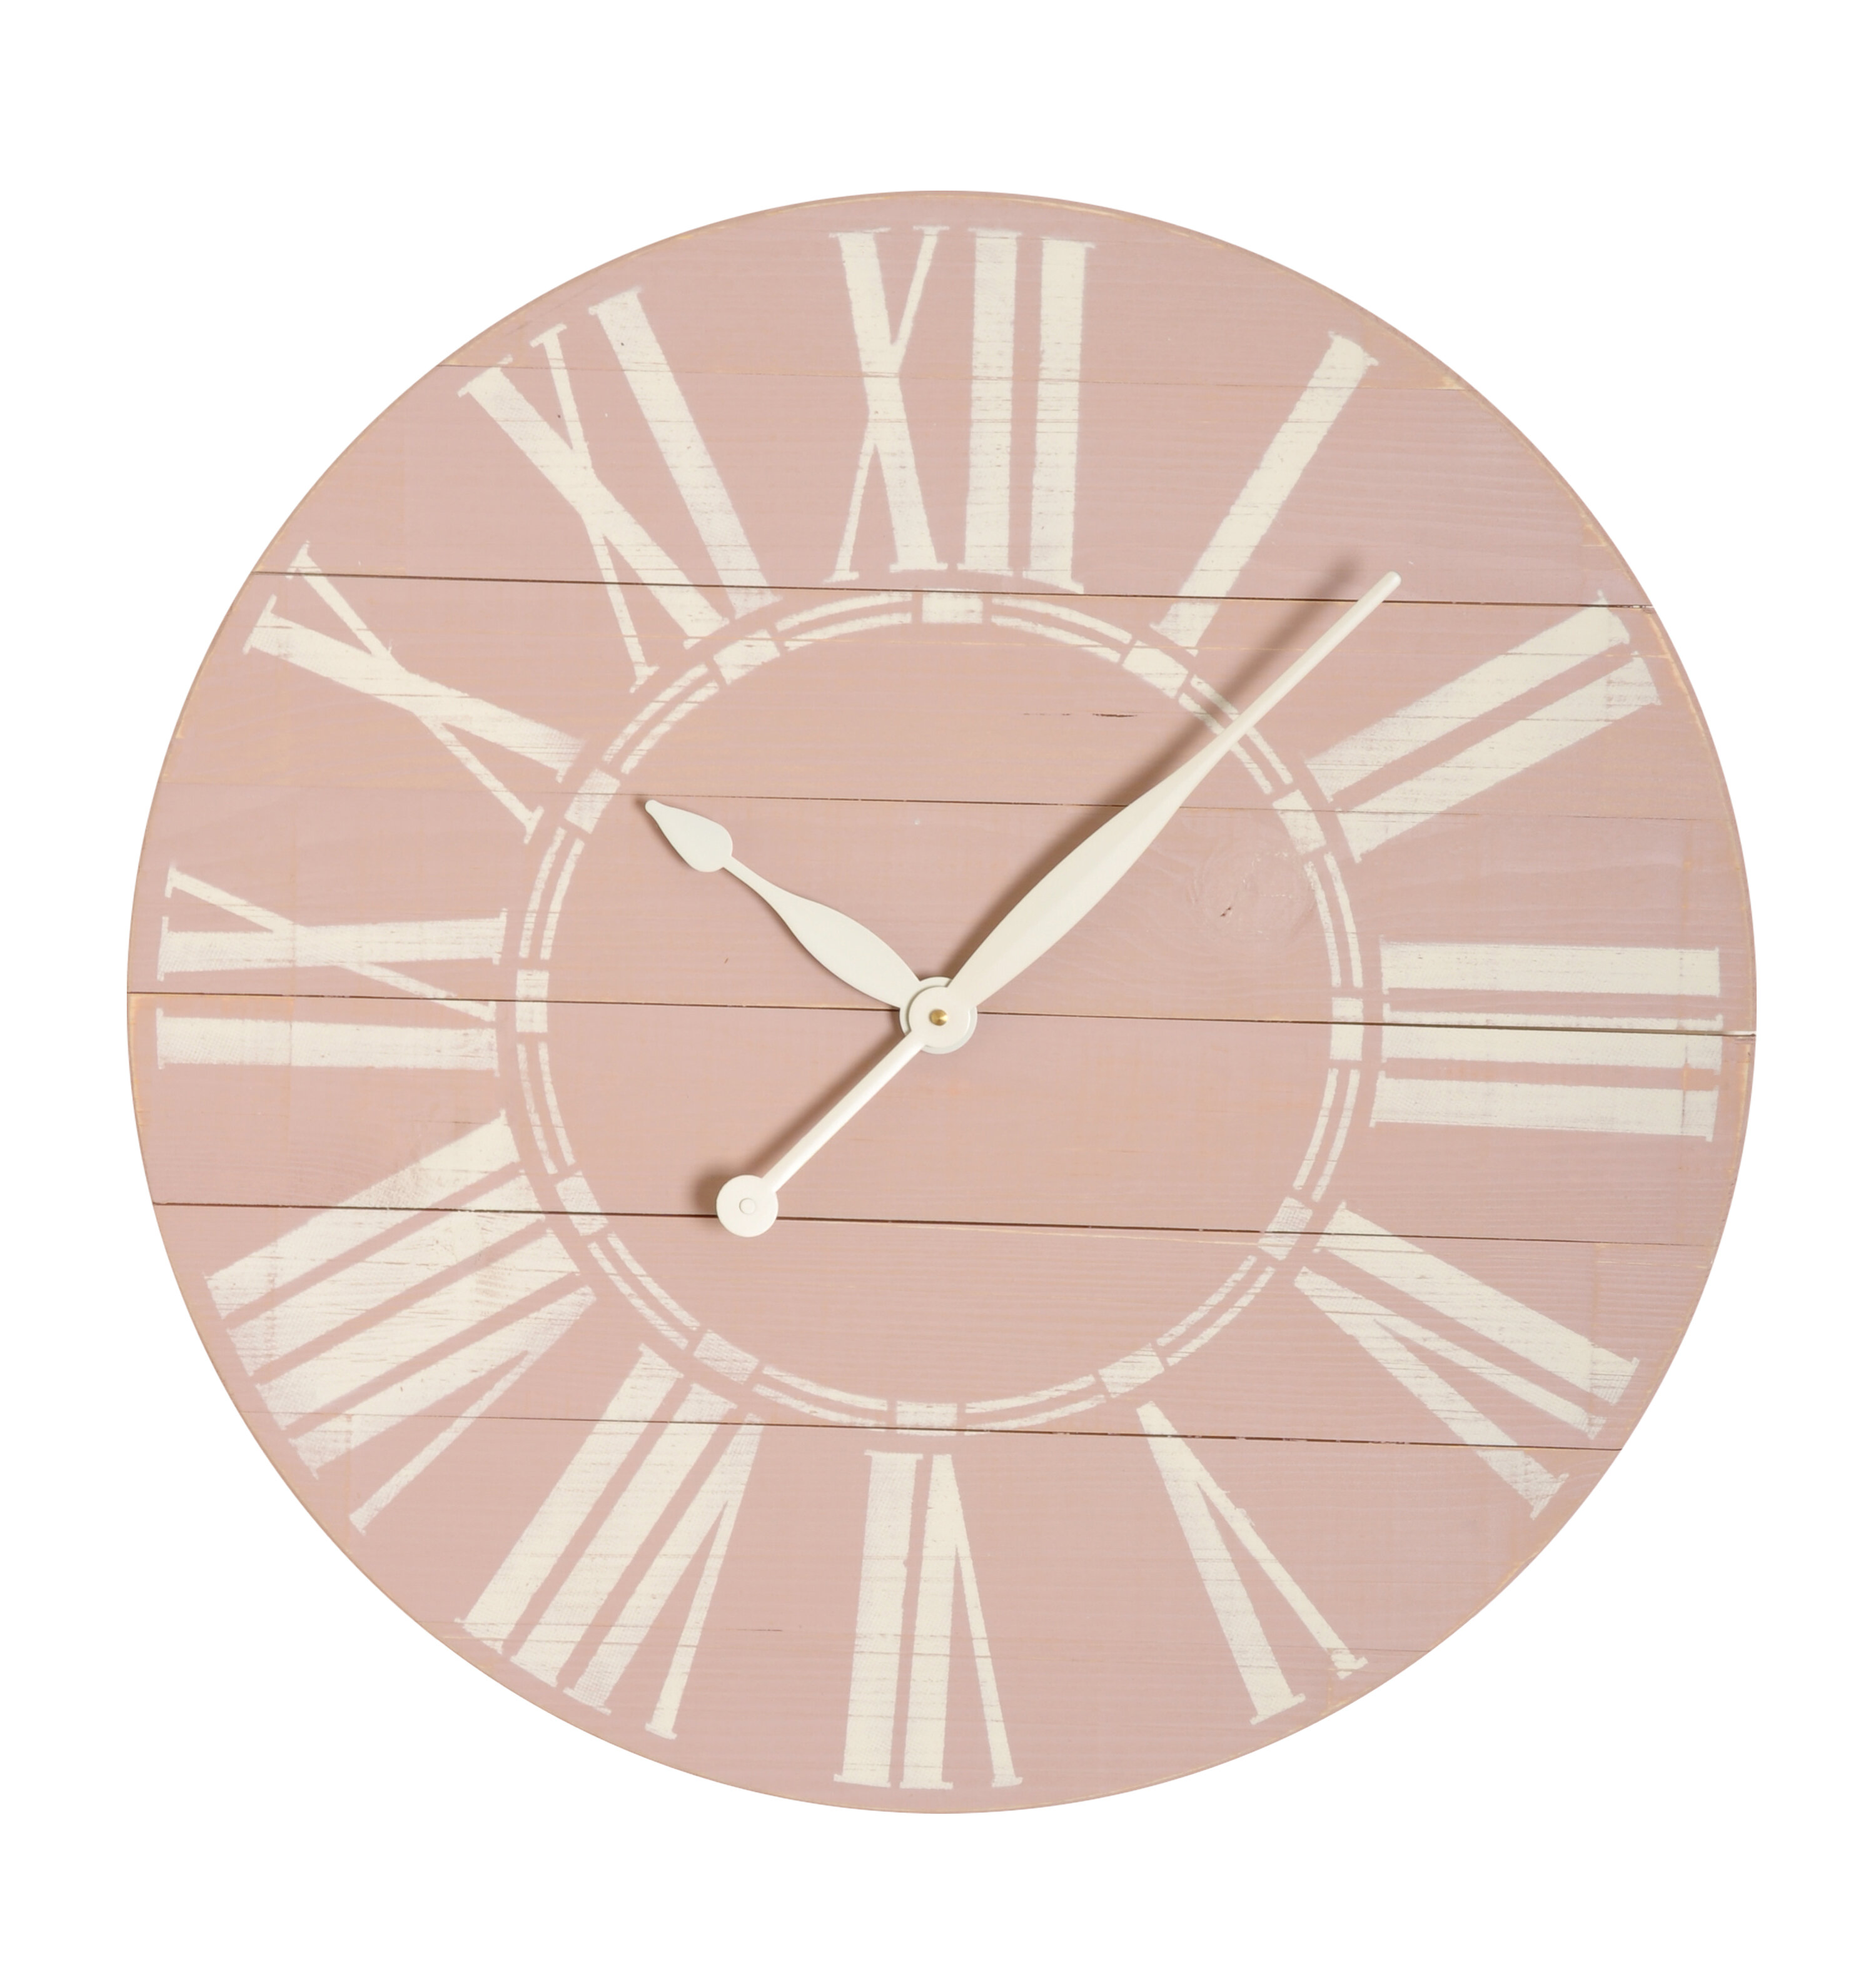 Pretty wooden wall clock with white blossom on a peachy pink background